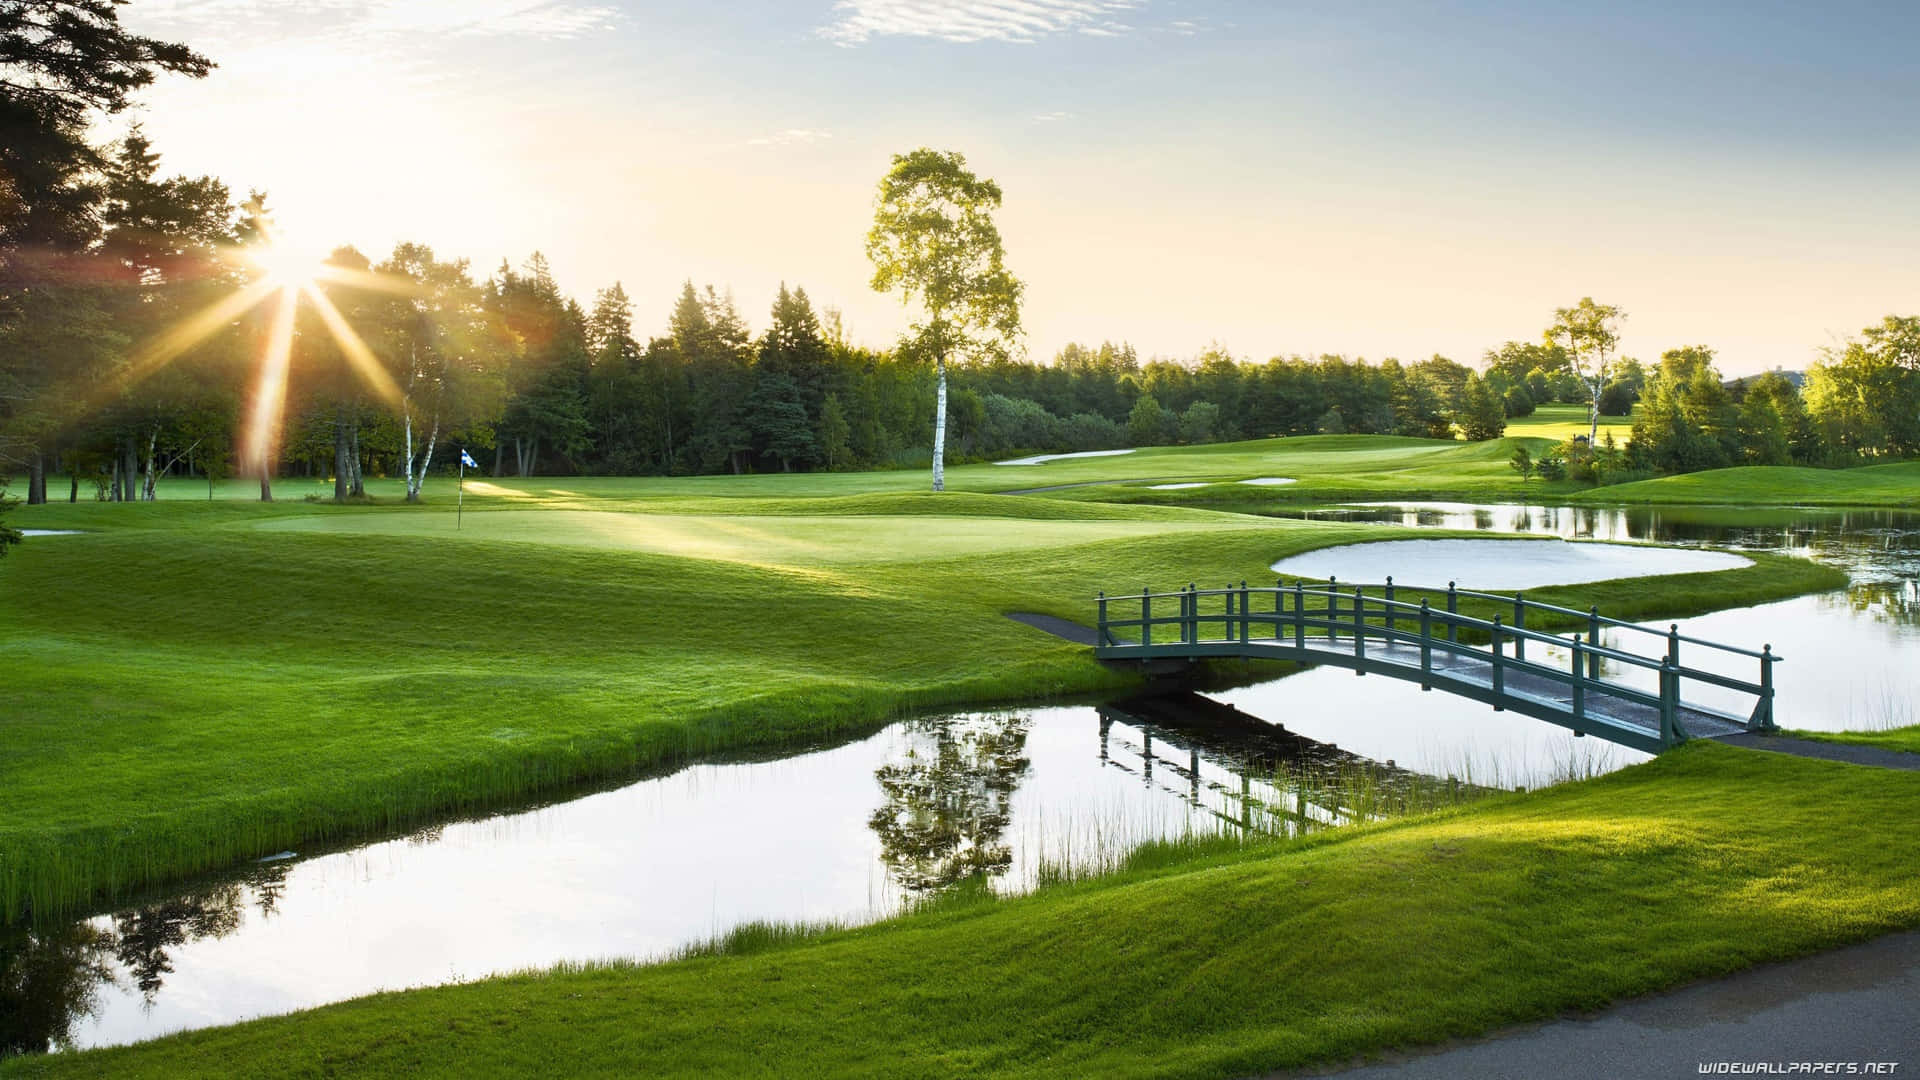 Our breathtaking HD golf course is perfect for any level of play.